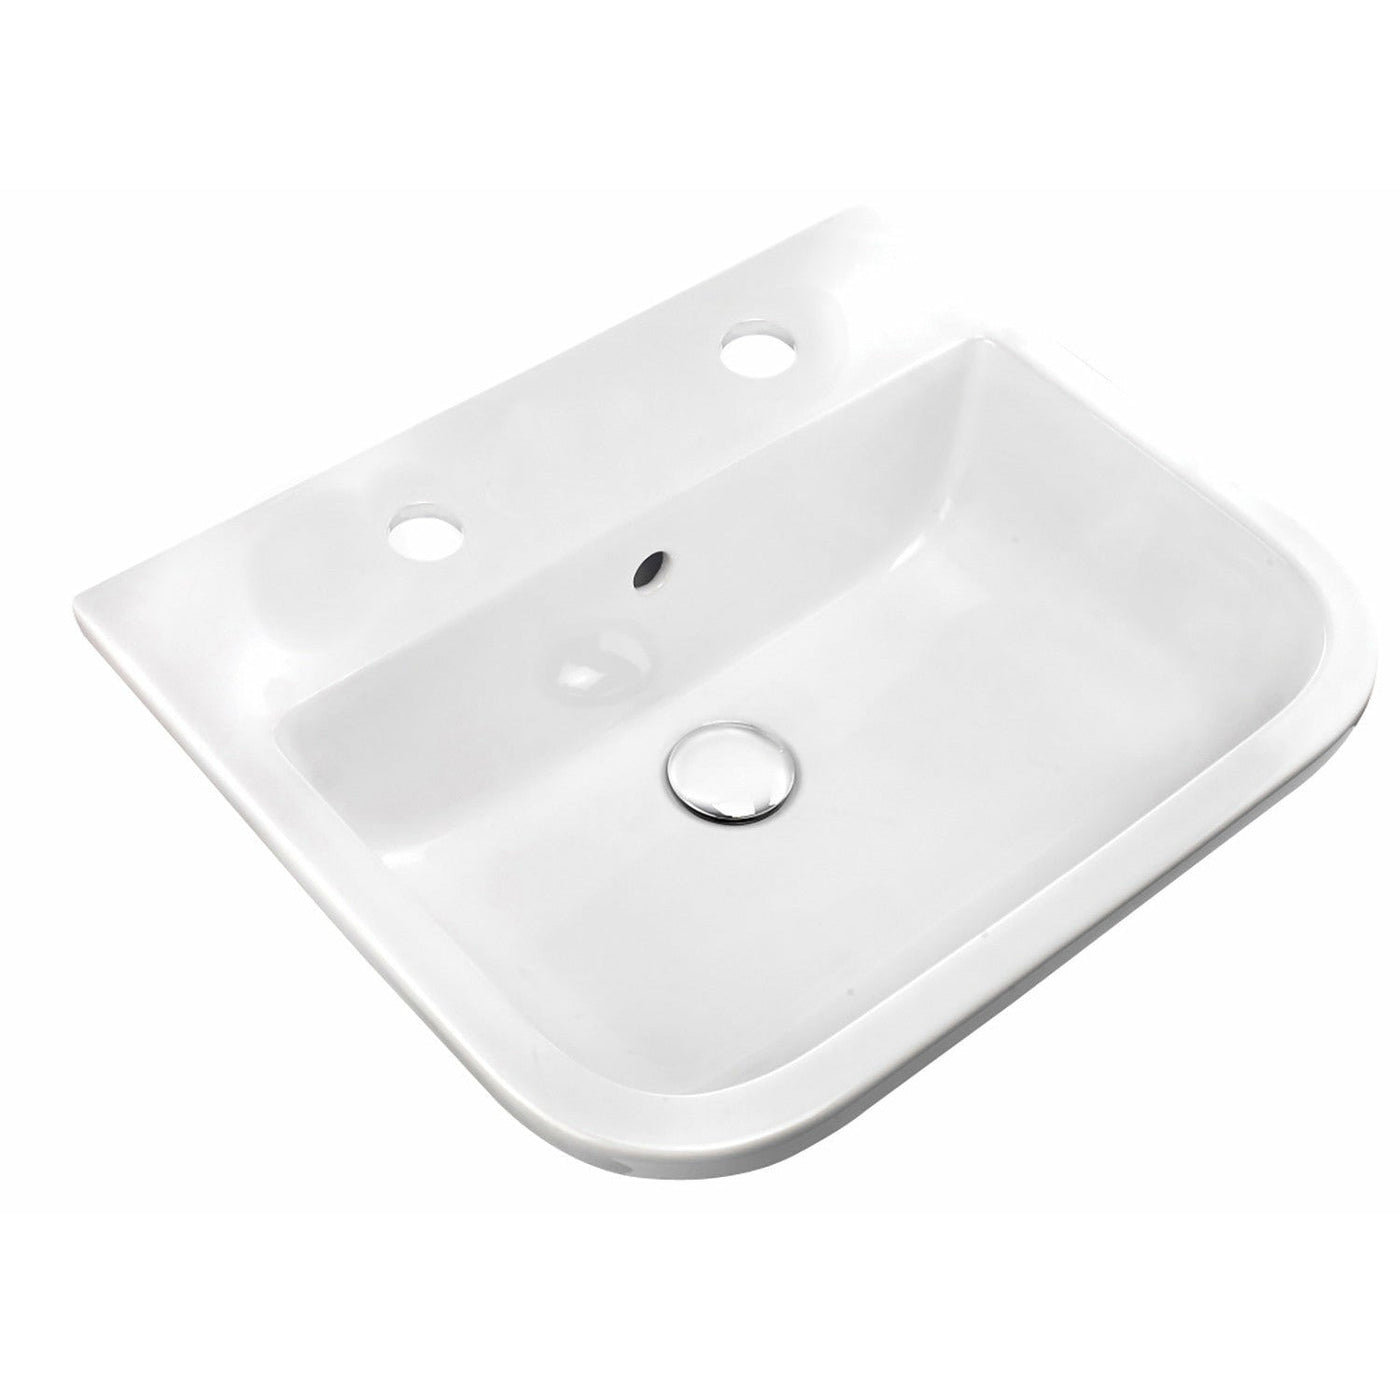 Frontline White Series 600 500mm Inset Counter Basin - 2 Tap Holes - Letta London - 